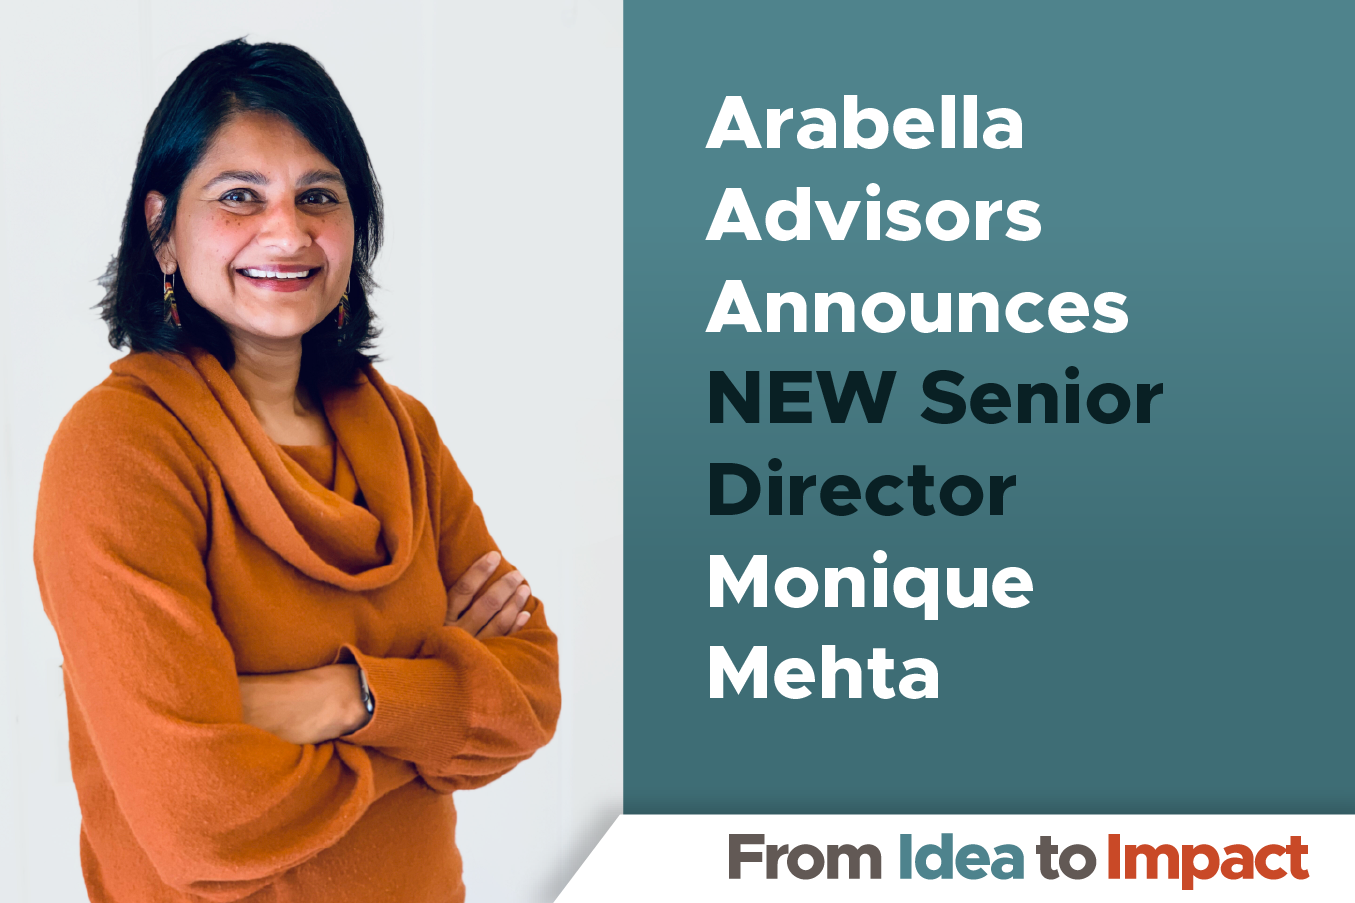 Arabella Advisors Adds Monique Mehta to Head Up ChangeWorks Services, Releases New Self-Reflection Tool